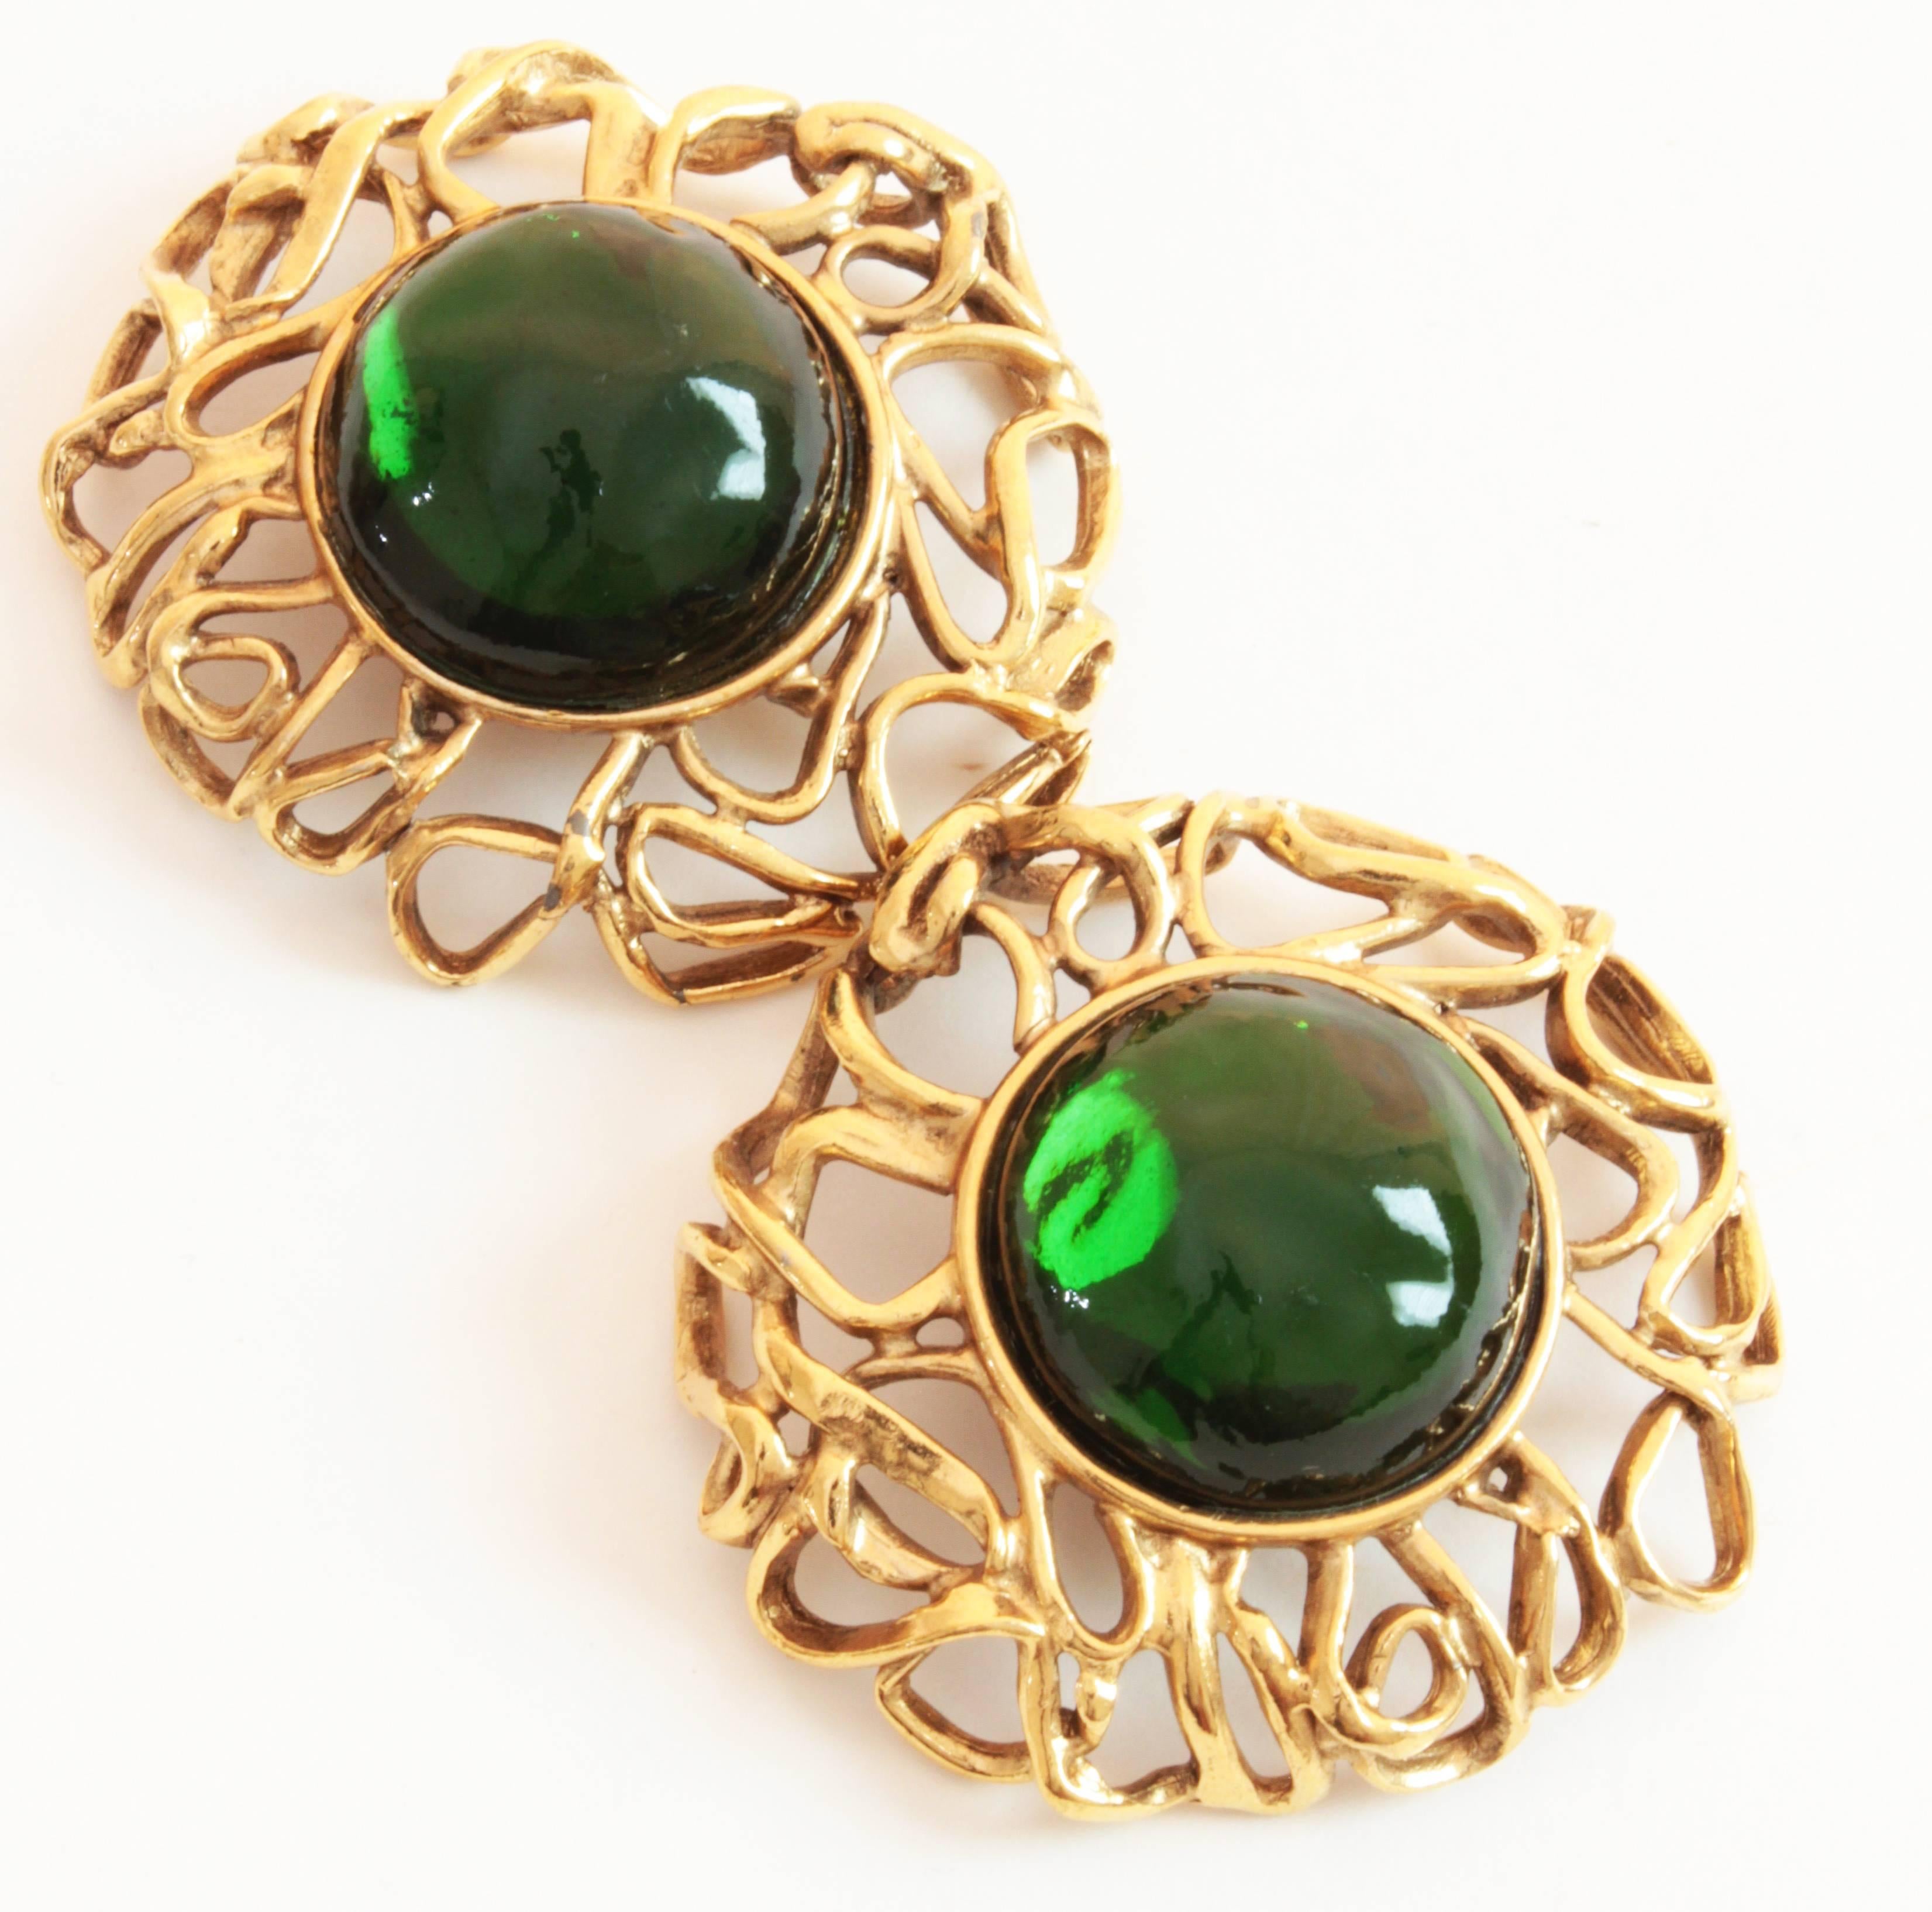 Contemporary 70s Yves Saint Laurent Large Earrings 2.5in Emerald Glass Cabochon Goossens YSL 